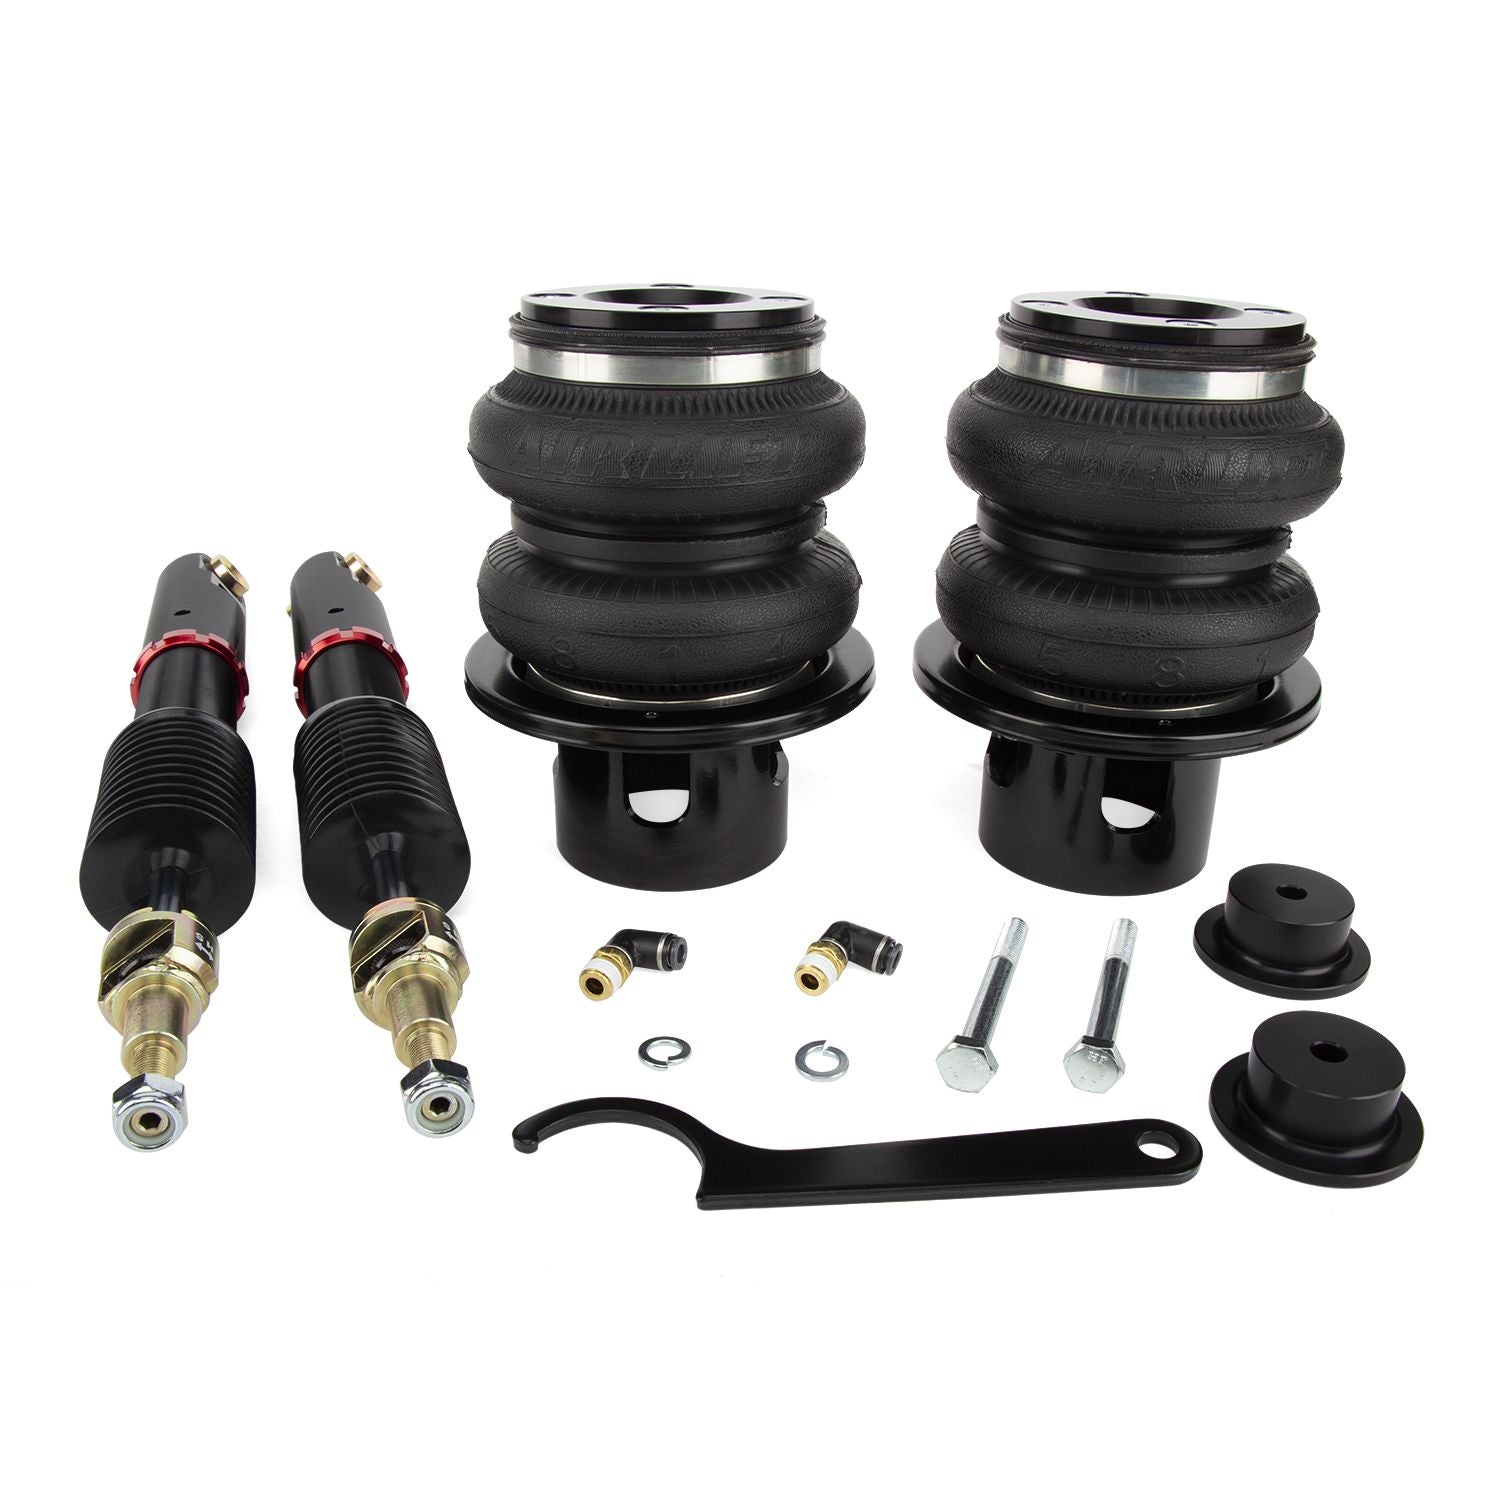 Revolutionize your 2012-2020 Camry and begin your #lifeonair! Our air springs will get you the maximum drop as well as superior handling sharp steering response and a comfortable ride backed by Air Lift's manufacturer's warranty.